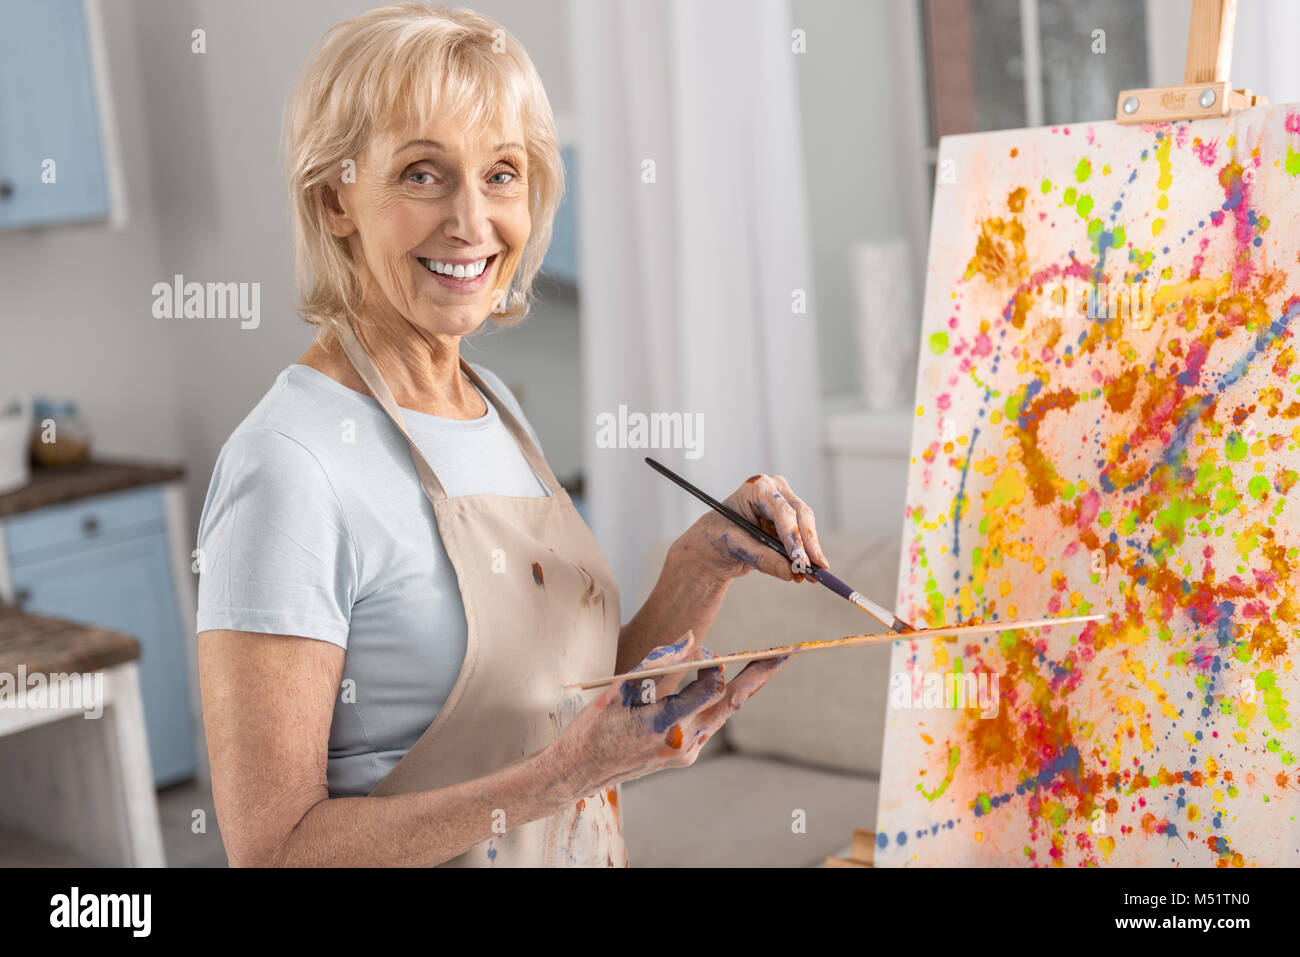 Happy mature woman creating her vision Stock Photo